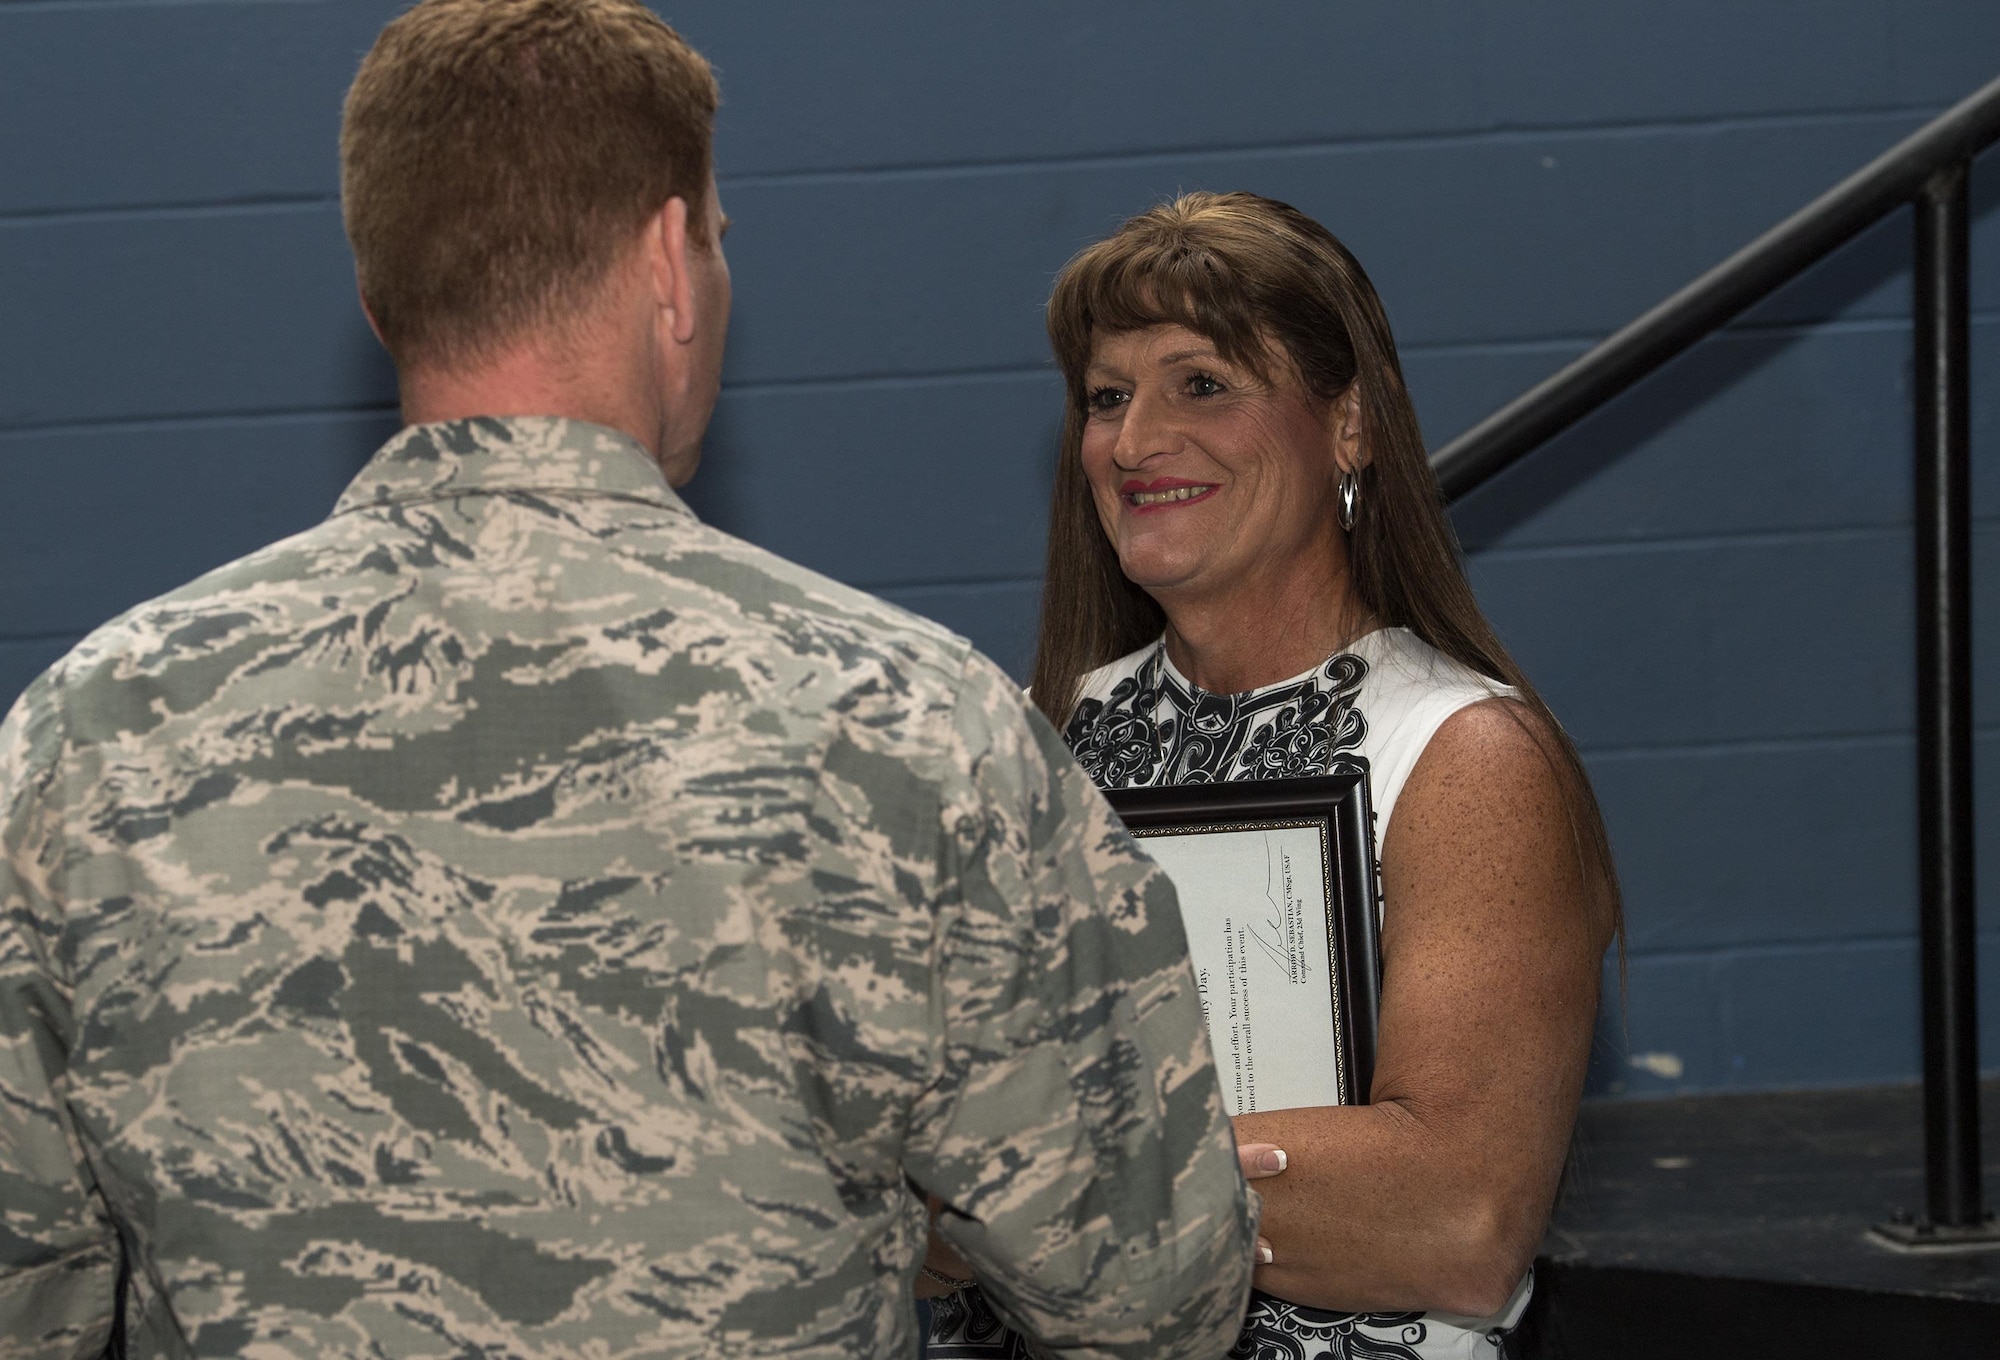 Retired U.S. Air Force Maj. Laura Perry, 45th Medical Operations Squadron master social worker, talks with an attendee after a speaking engagement, Dec. 2, 2016, at Moody Air Force Base, Ga. Perry was instrumental in the fight for transgender military members to openly serve and travels the country sharing her story. (U.S. Air Force photo by Airman 1st Class Janiqua P. Robinson)